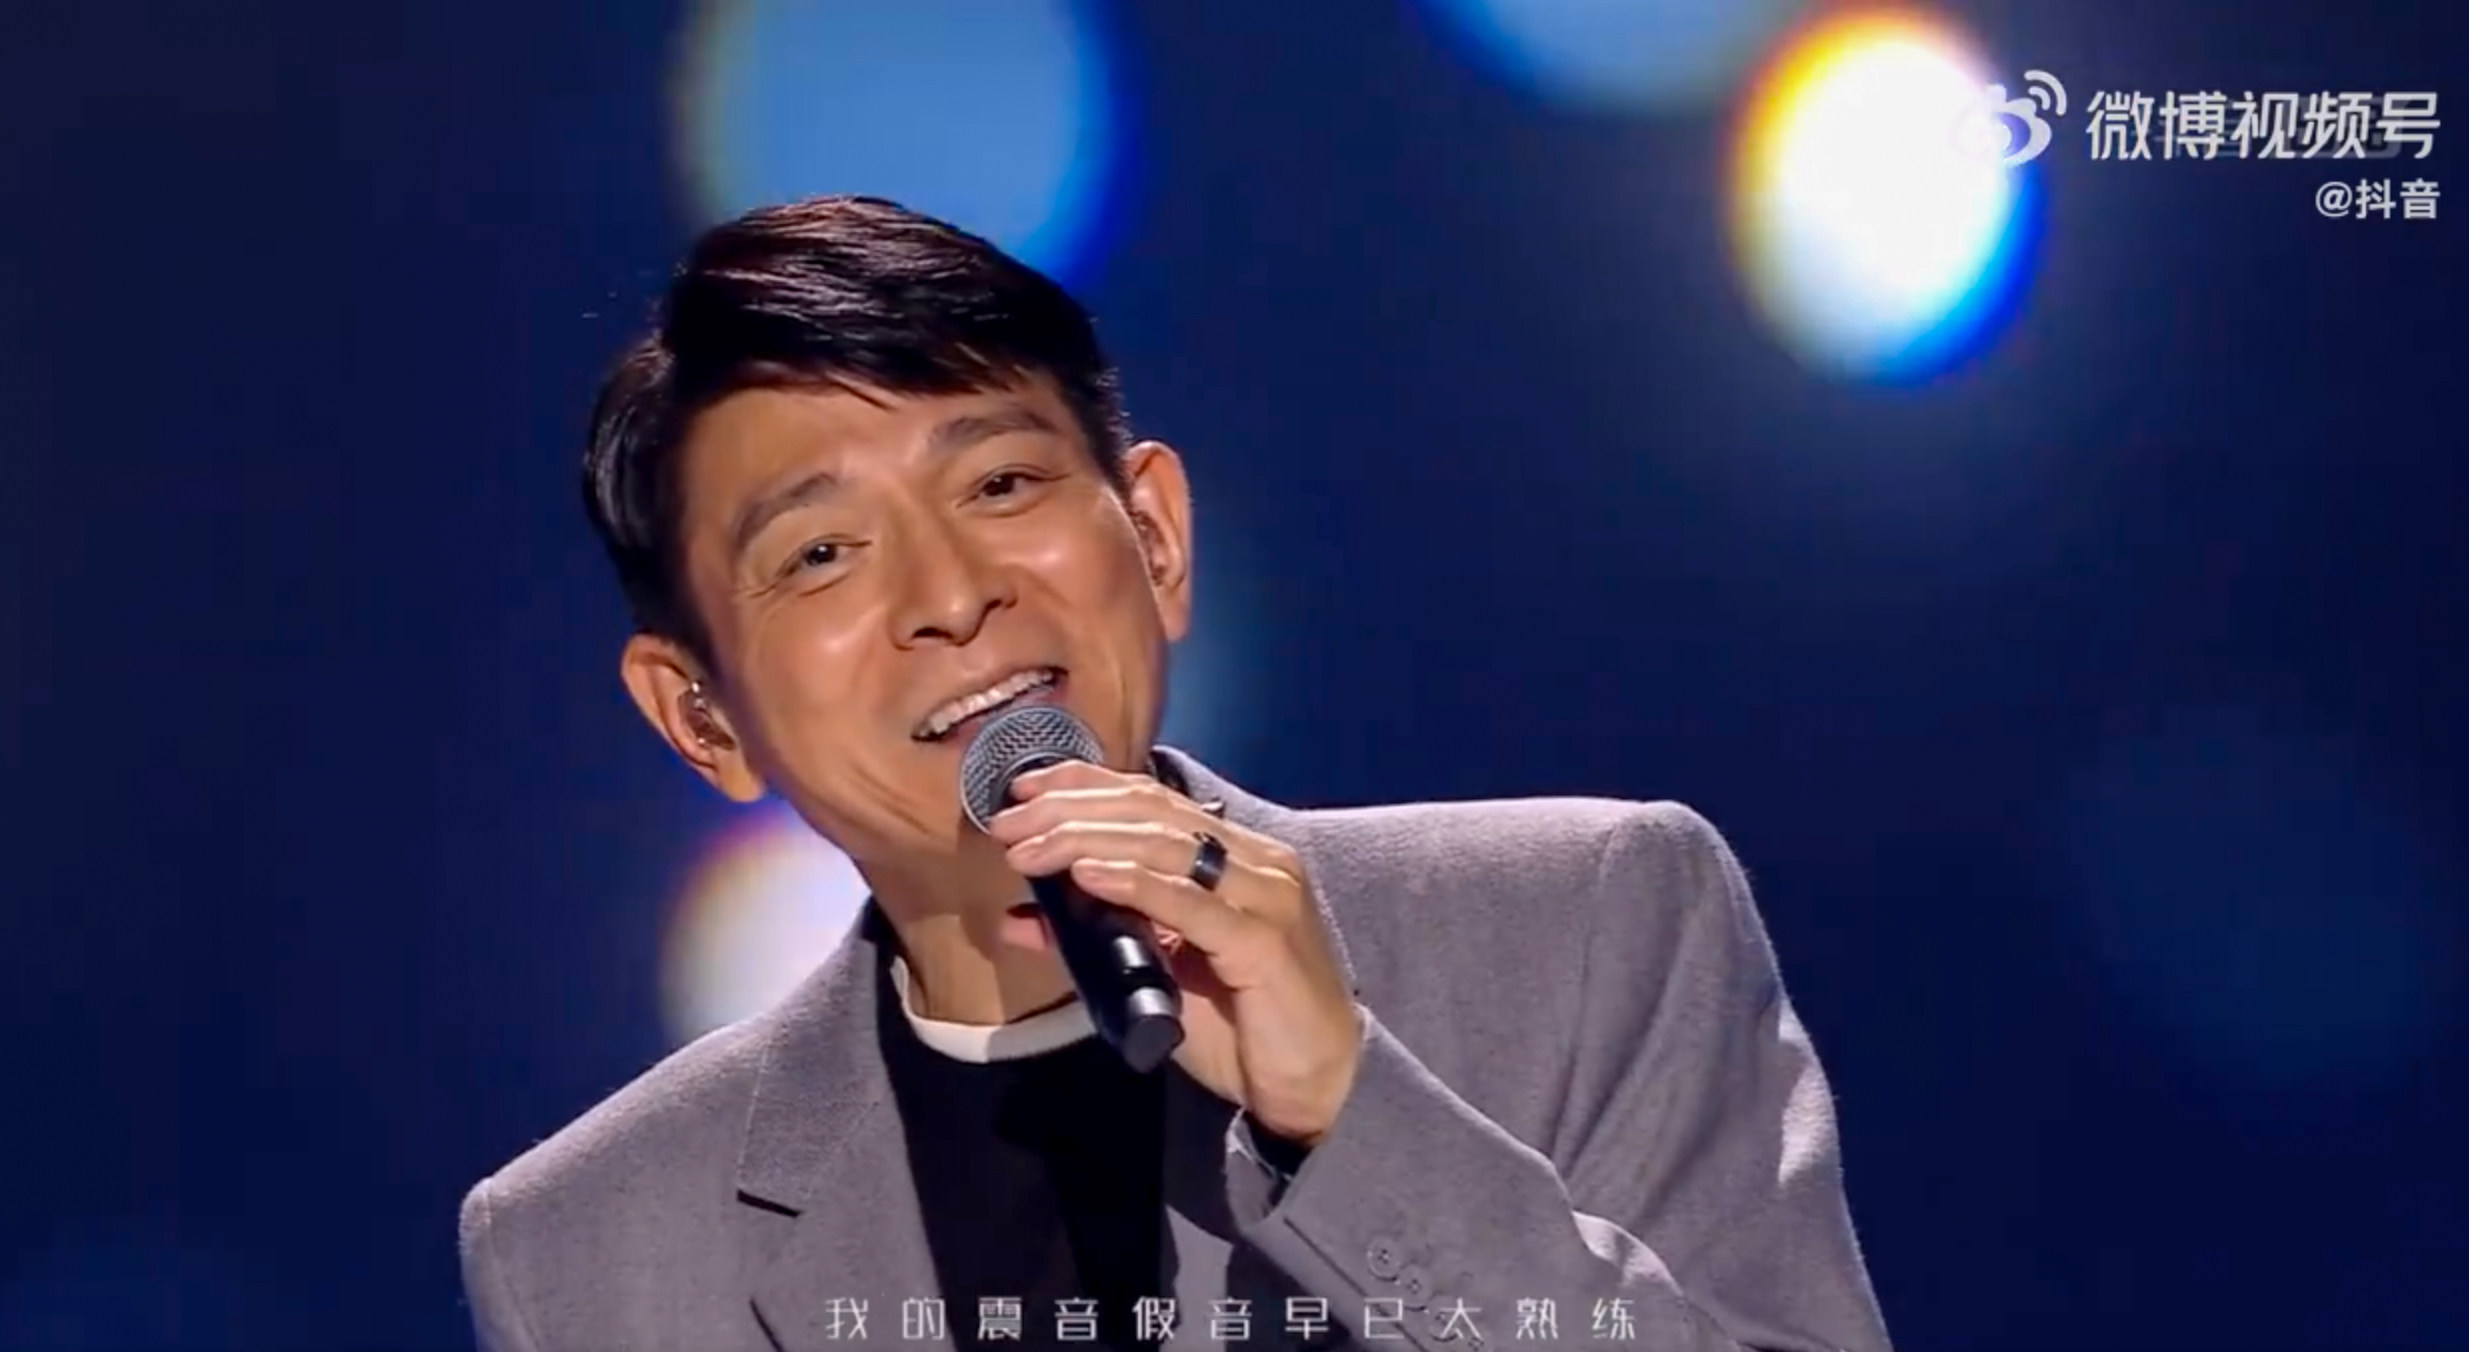 Canto-pop icon Andy Lau Tak-wah had nearly 77 million followers on short video platform Douyin as of Sunday, following his successful online concert held on September 3, 2022. Photo: Weibo